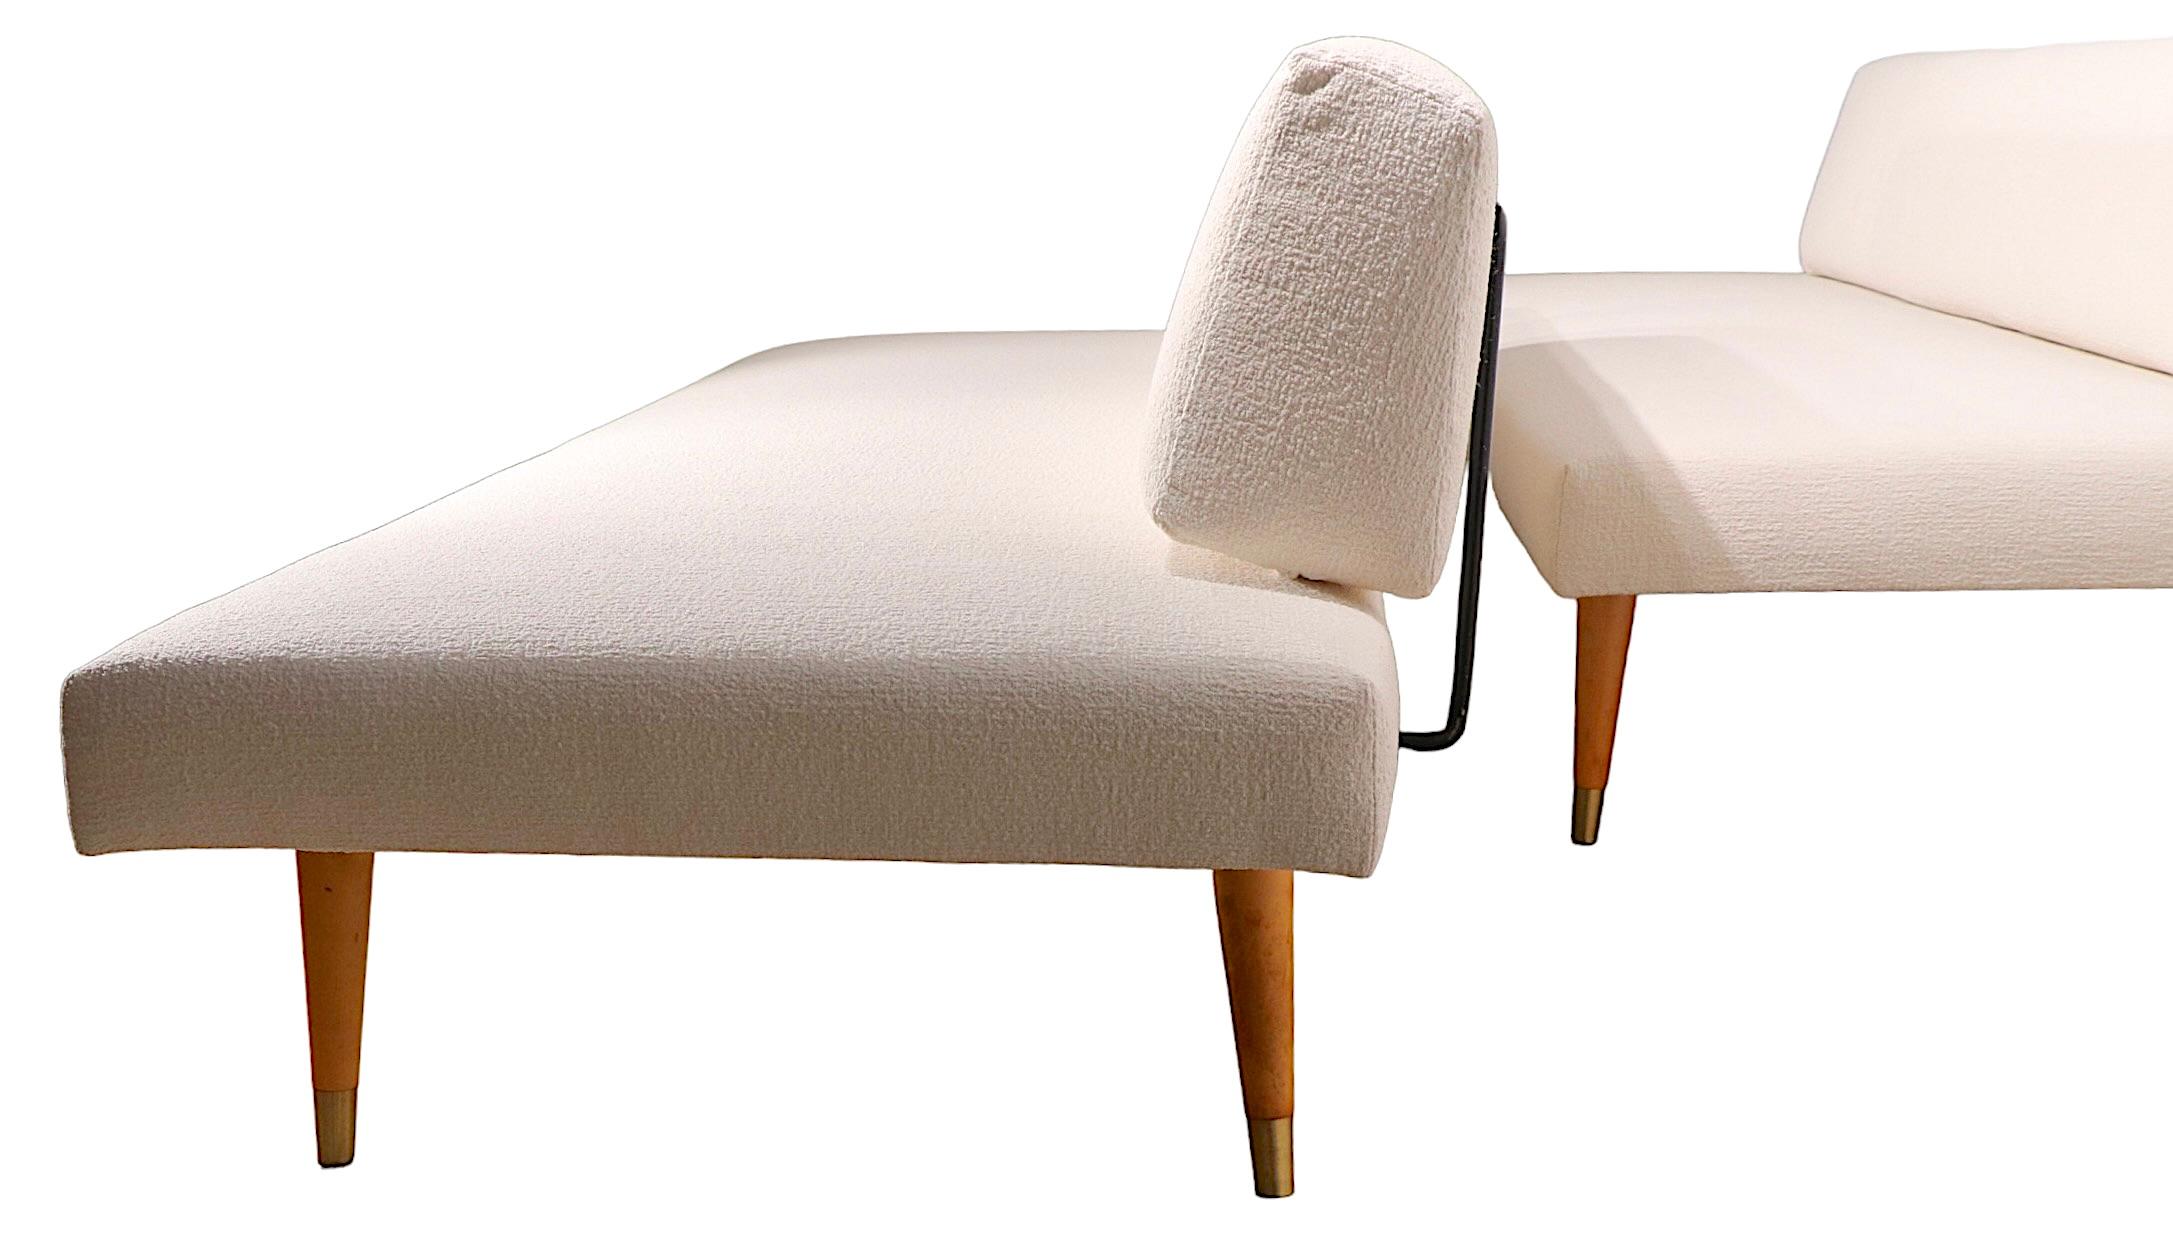 20th Century Pr. Mid Century Daybeds Newly Upholstered in Off White Boucle Fabric, c. 1950's